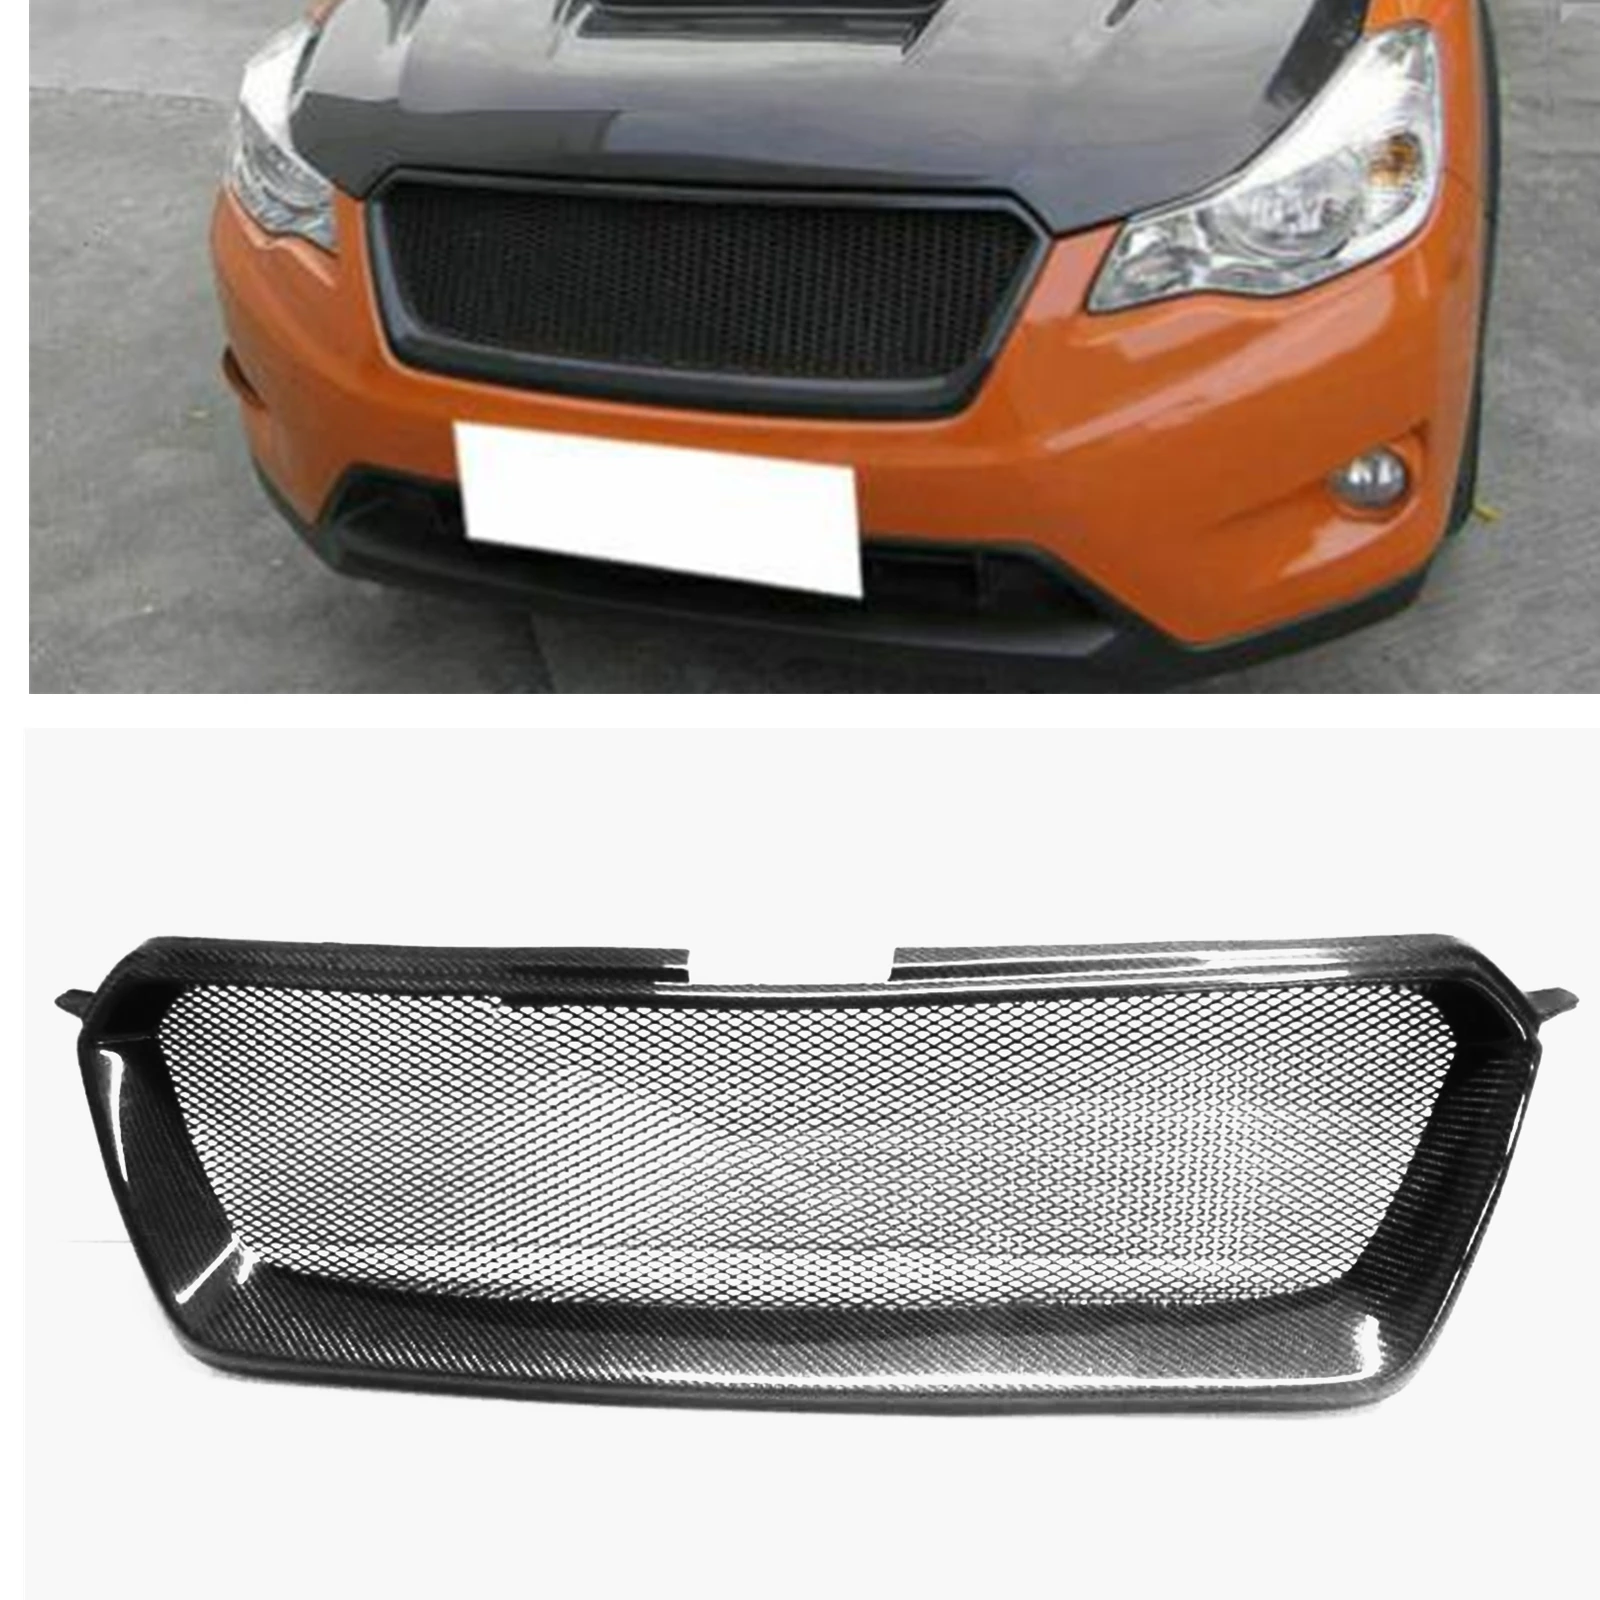 

Front Grille Racing Grill For Subaru XV 2011-2016 Real Carbon Fiber Car Upper Bumper Hood Mesh Body Kit Grid Grating Replacement